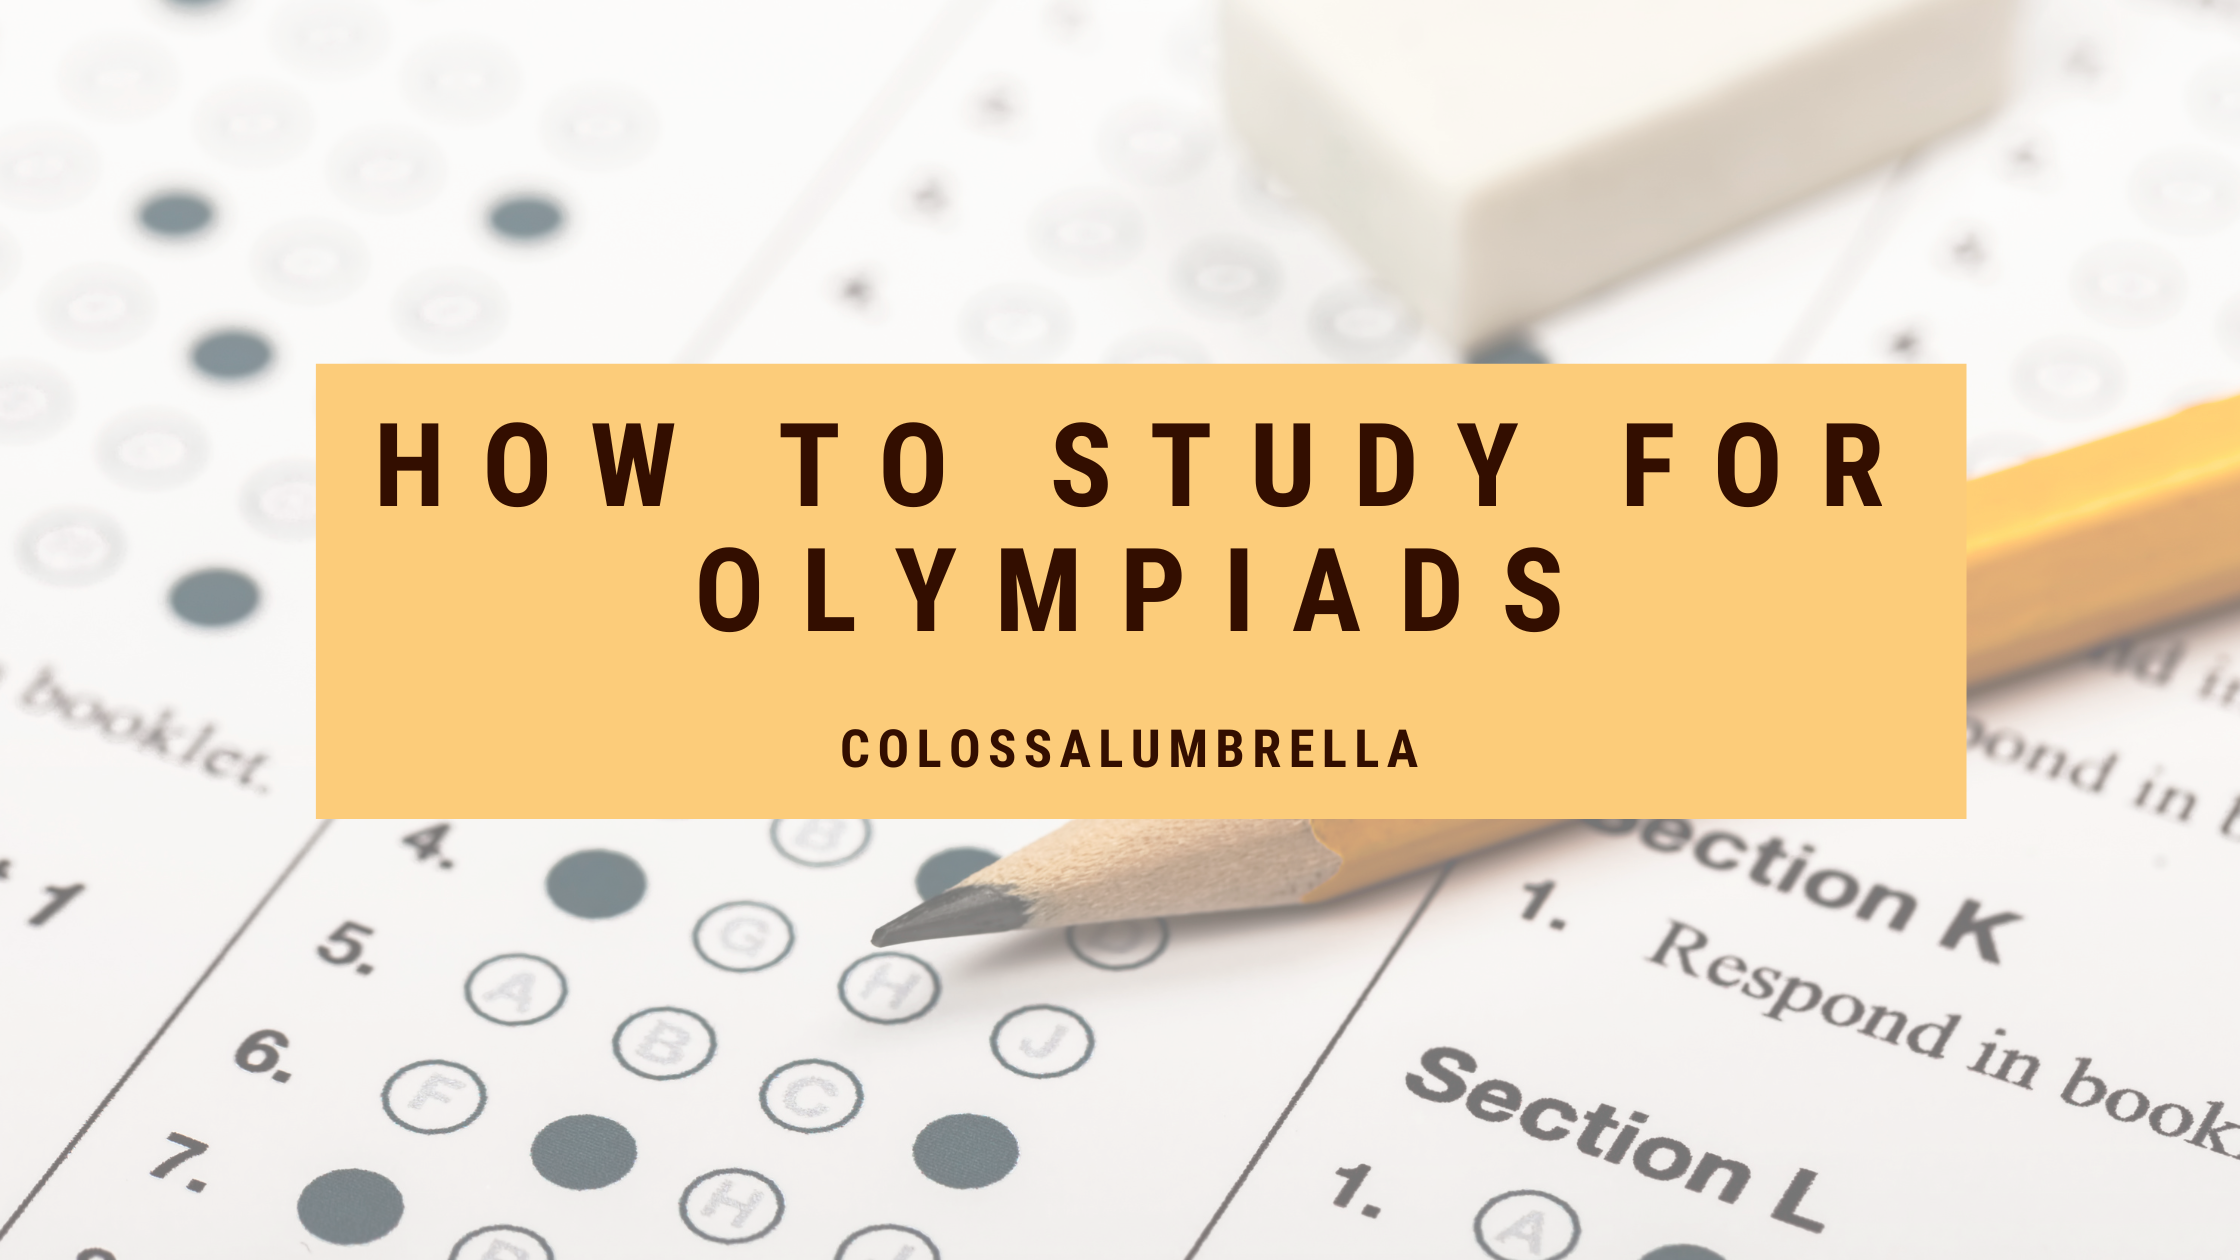 7 Easy tips on how to study for Olympiads